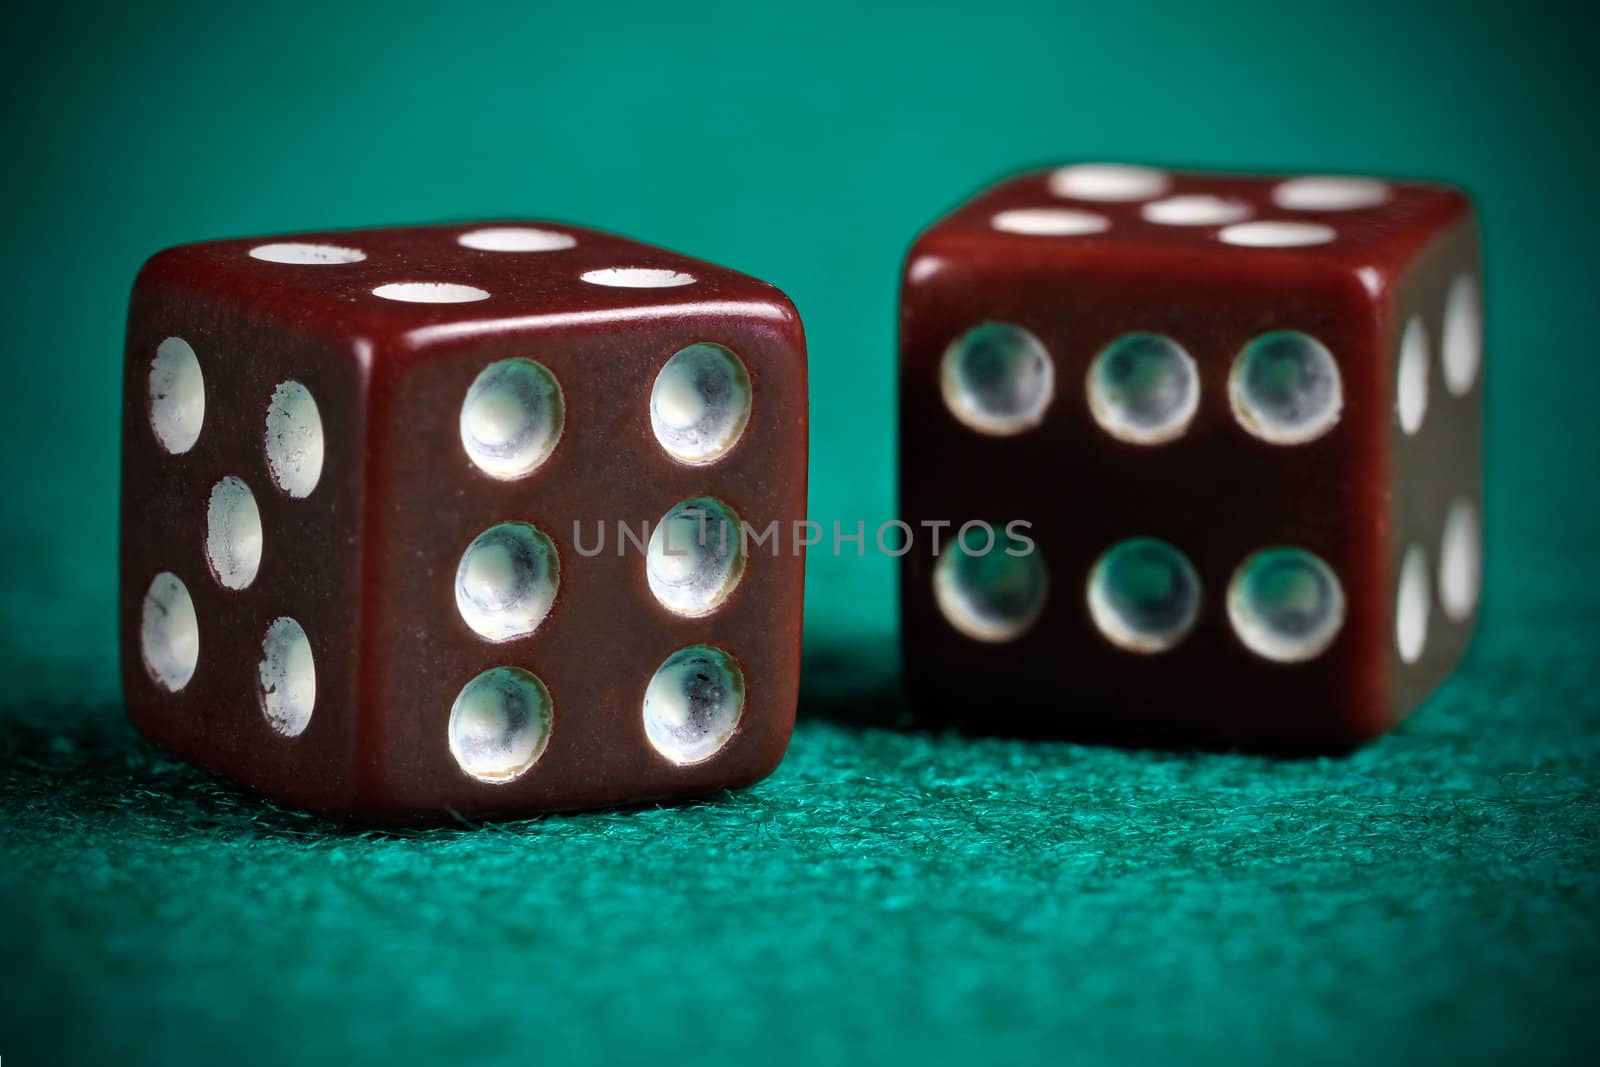 A pair of retro looking worn out dices